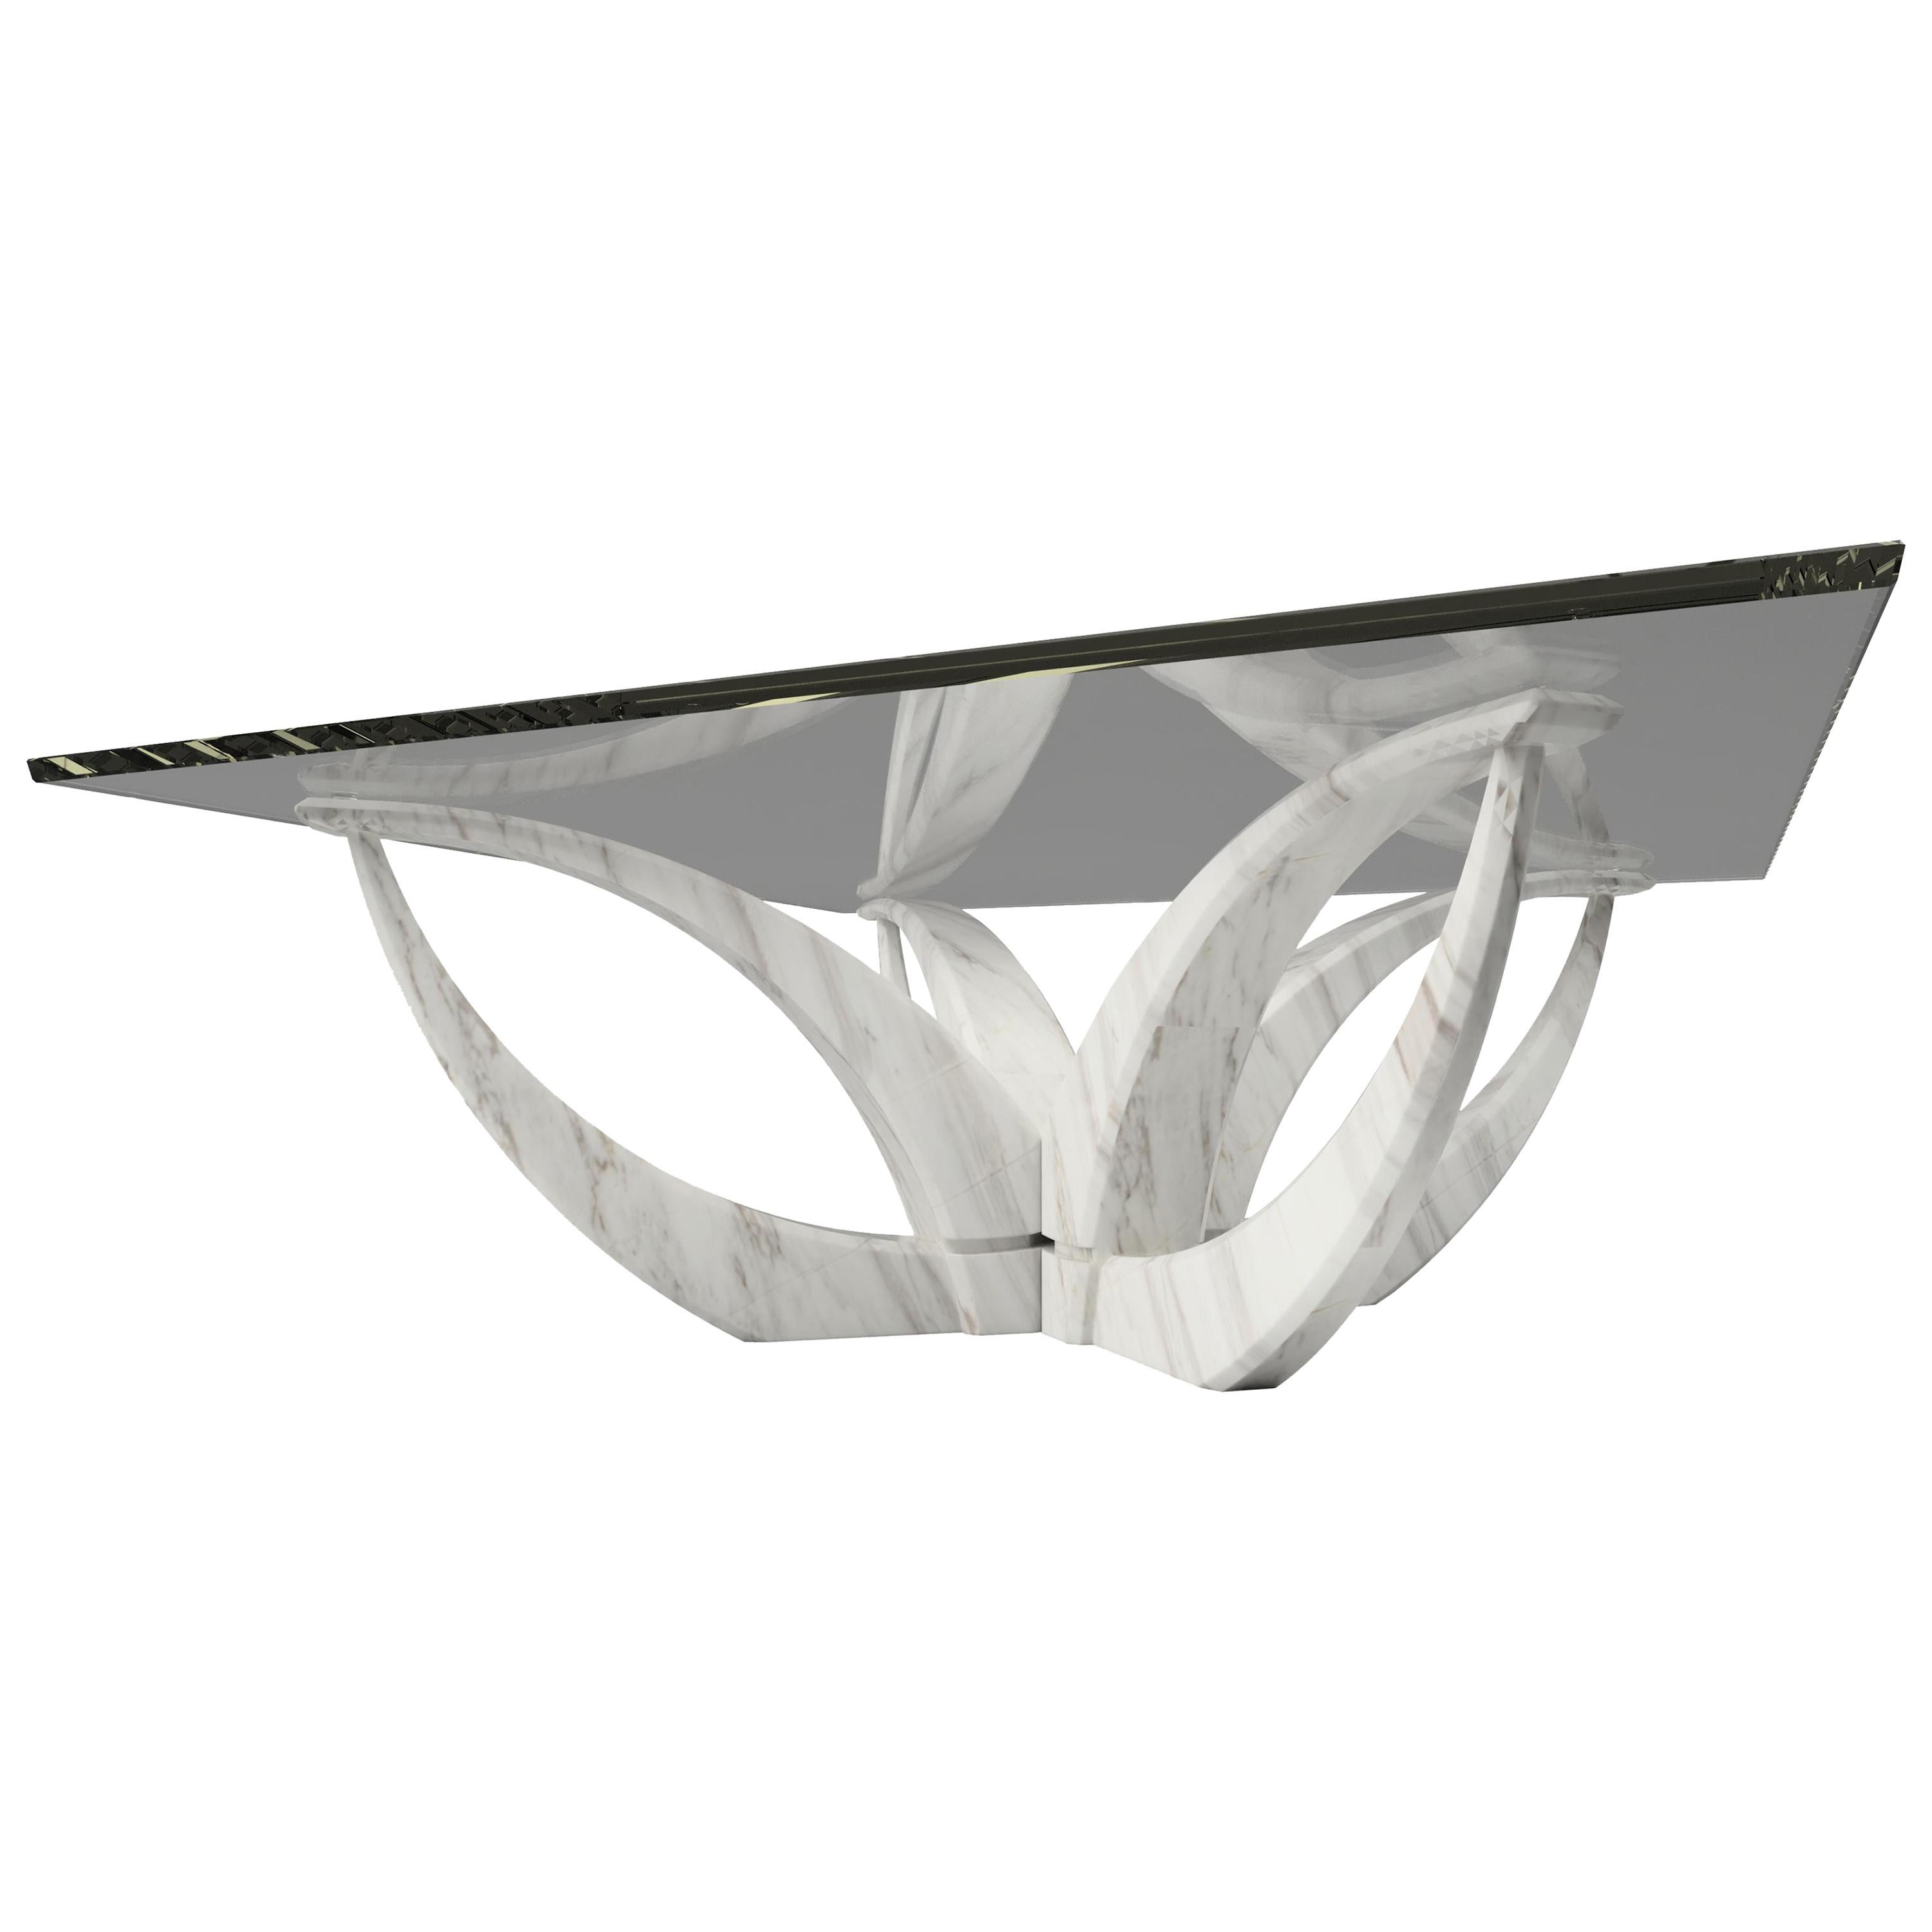 "The Diamond Moon Flower" Center Table ft. White Marble and Glass